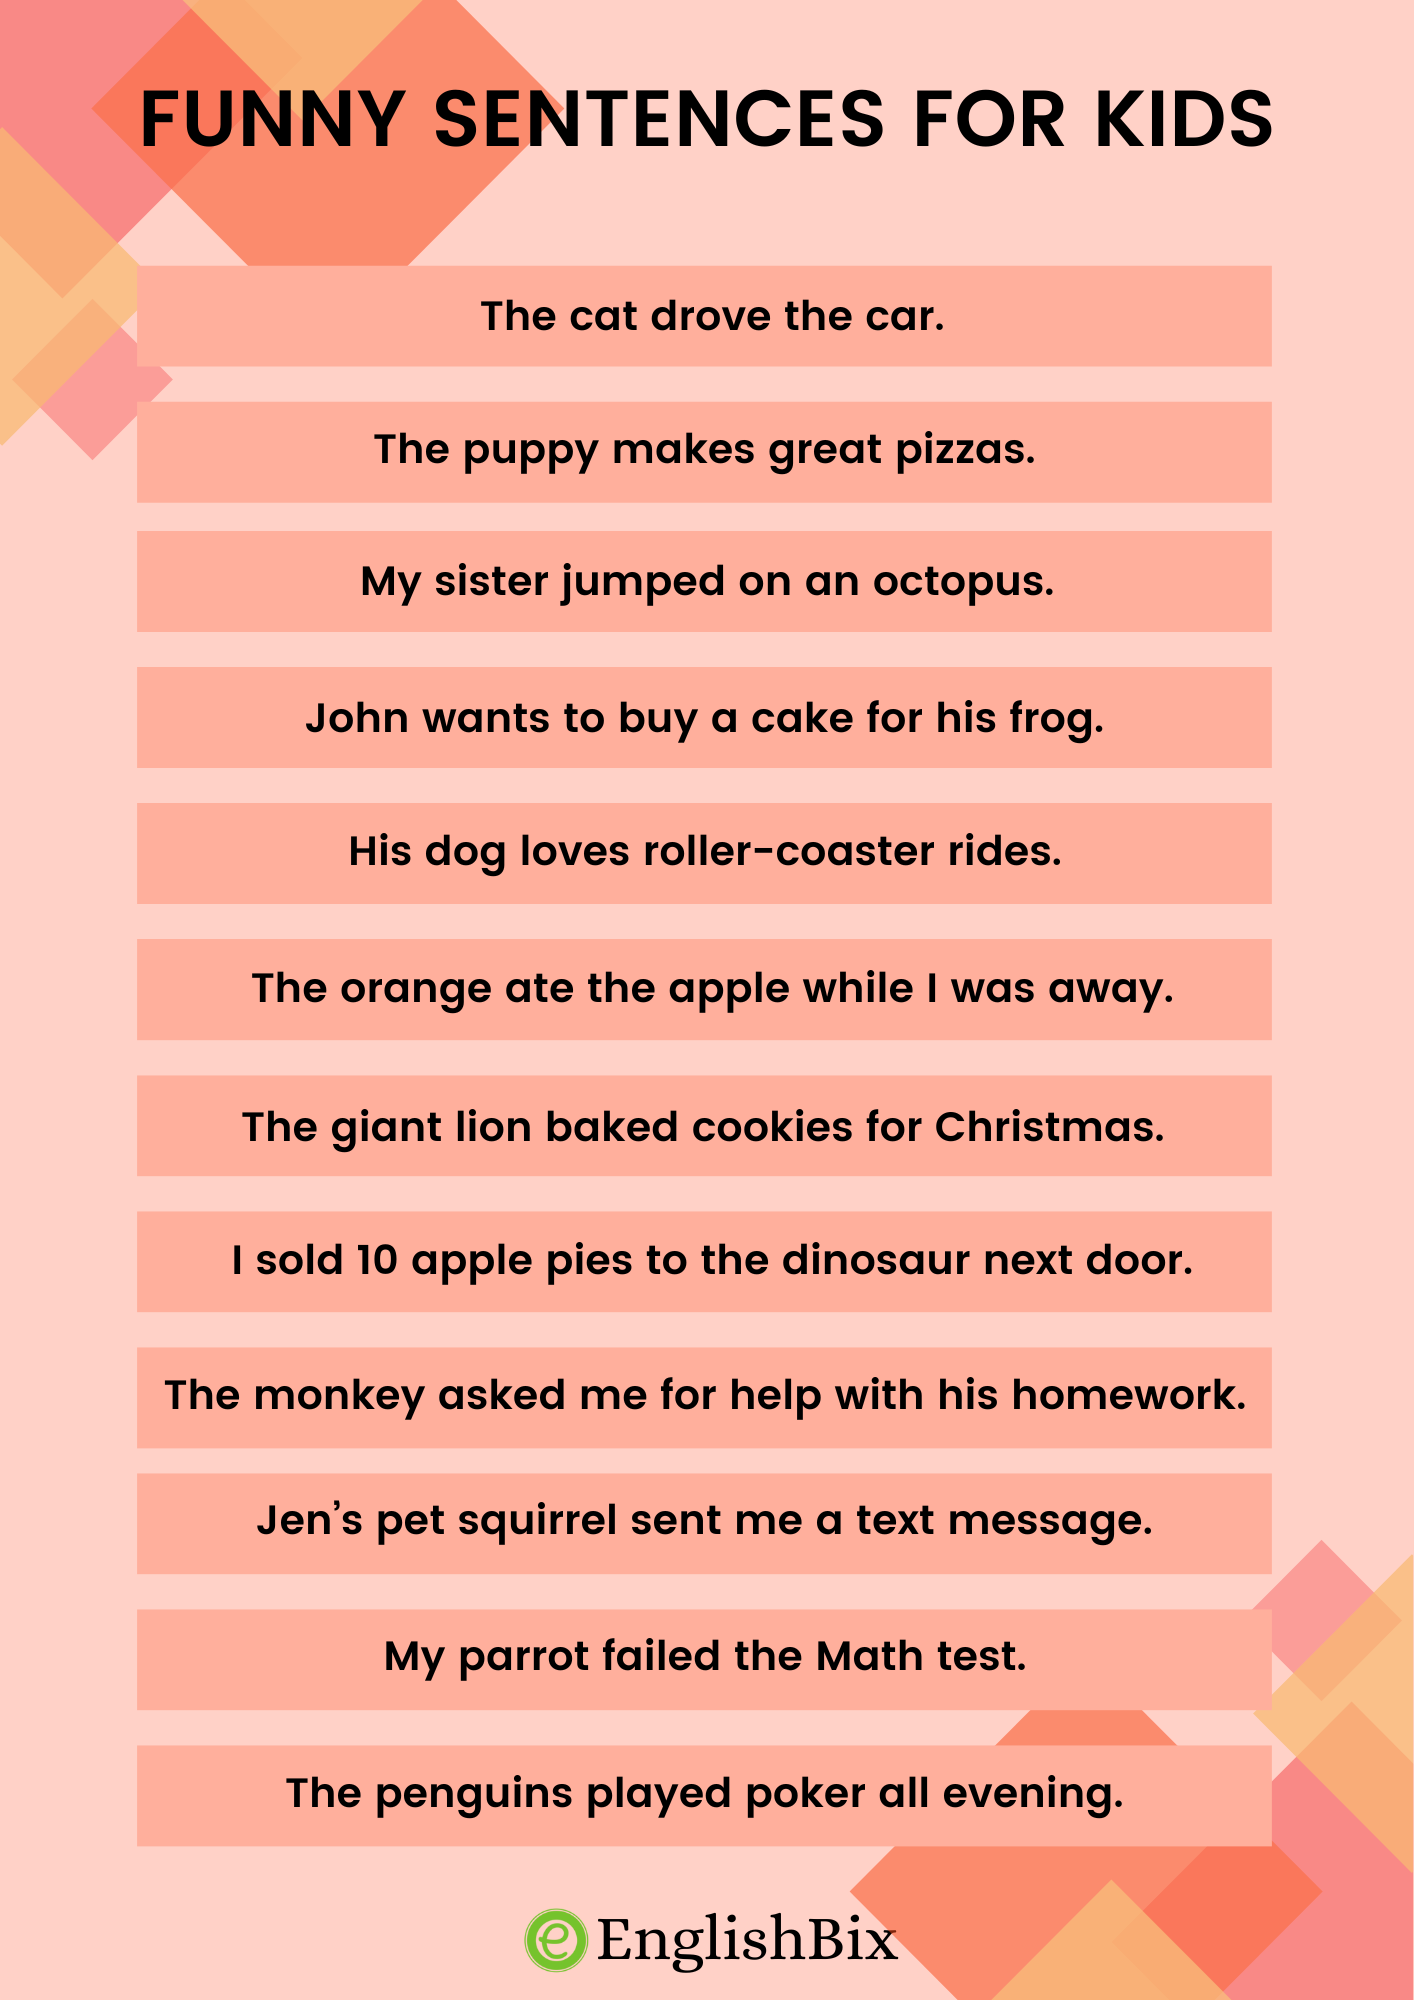 100+ Funny Sentences in English for Silly Kids - EnglishBix